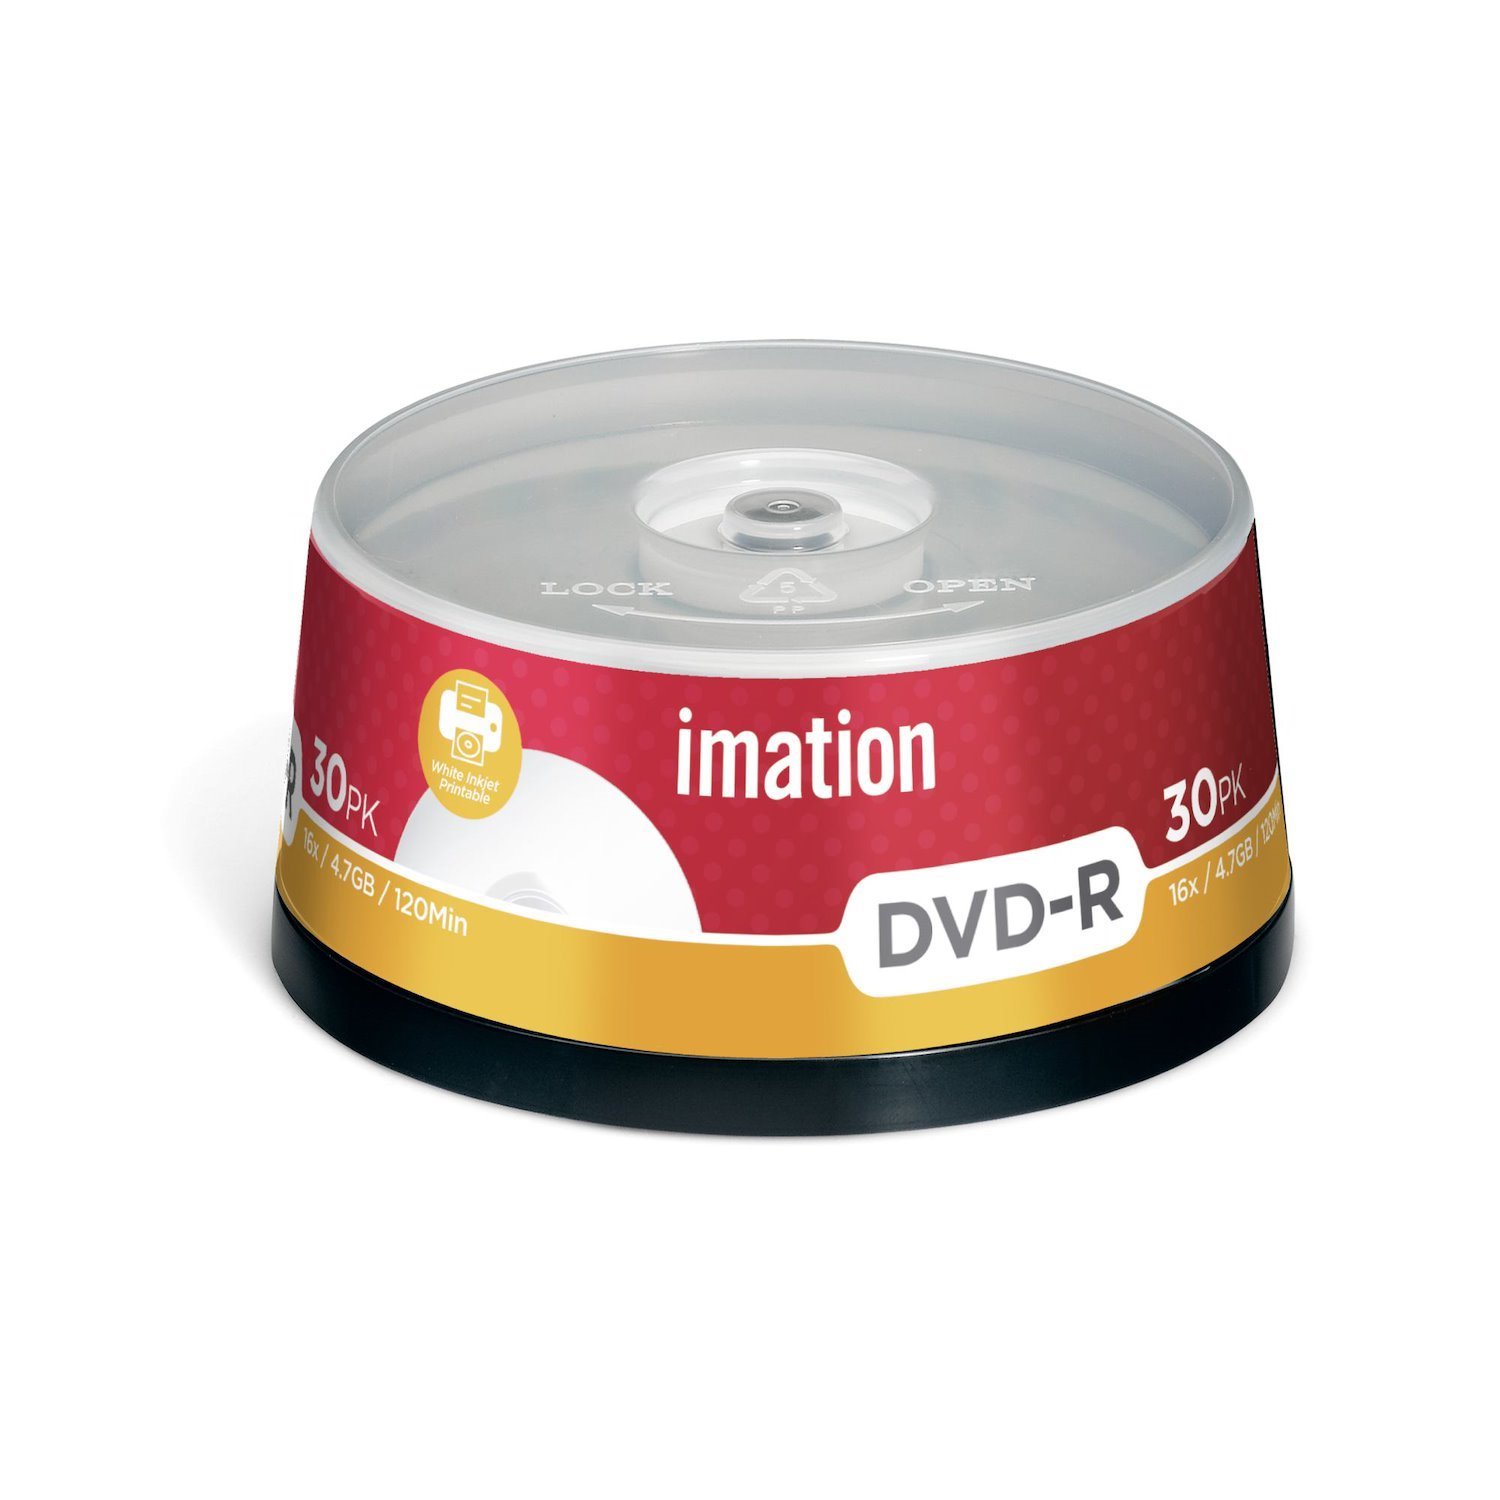 Imation 73000019619 Blank DVD 4.7 GB DVD-R 30 PC[S] (Imation DVD-R Ij Print 16X 30PK Spindle 4.7GB 15-Lang [1Year Warranty])